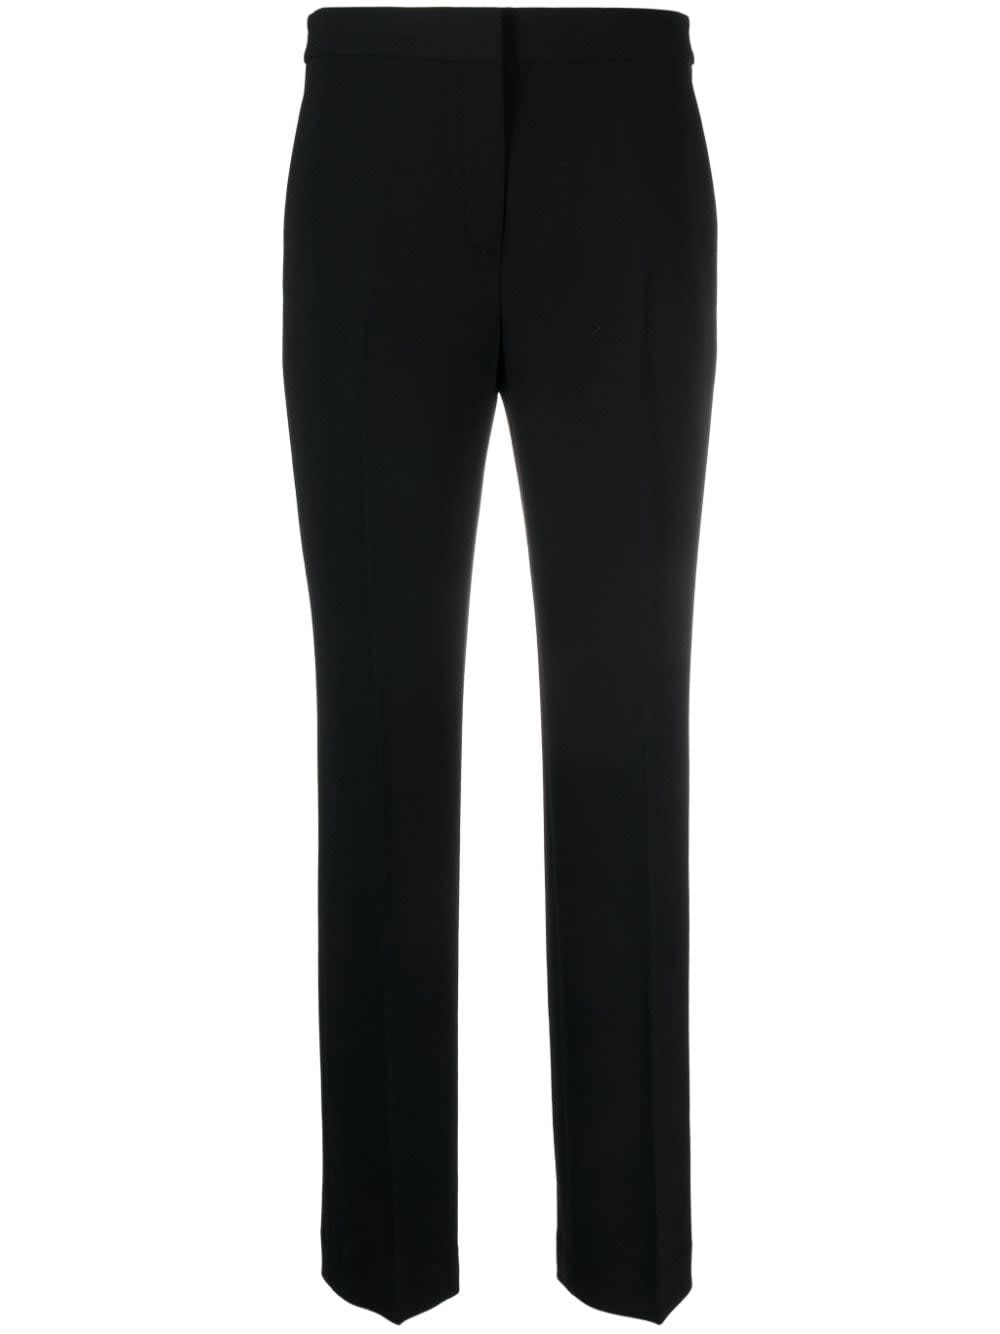 THEORY SLIM TROUSERS